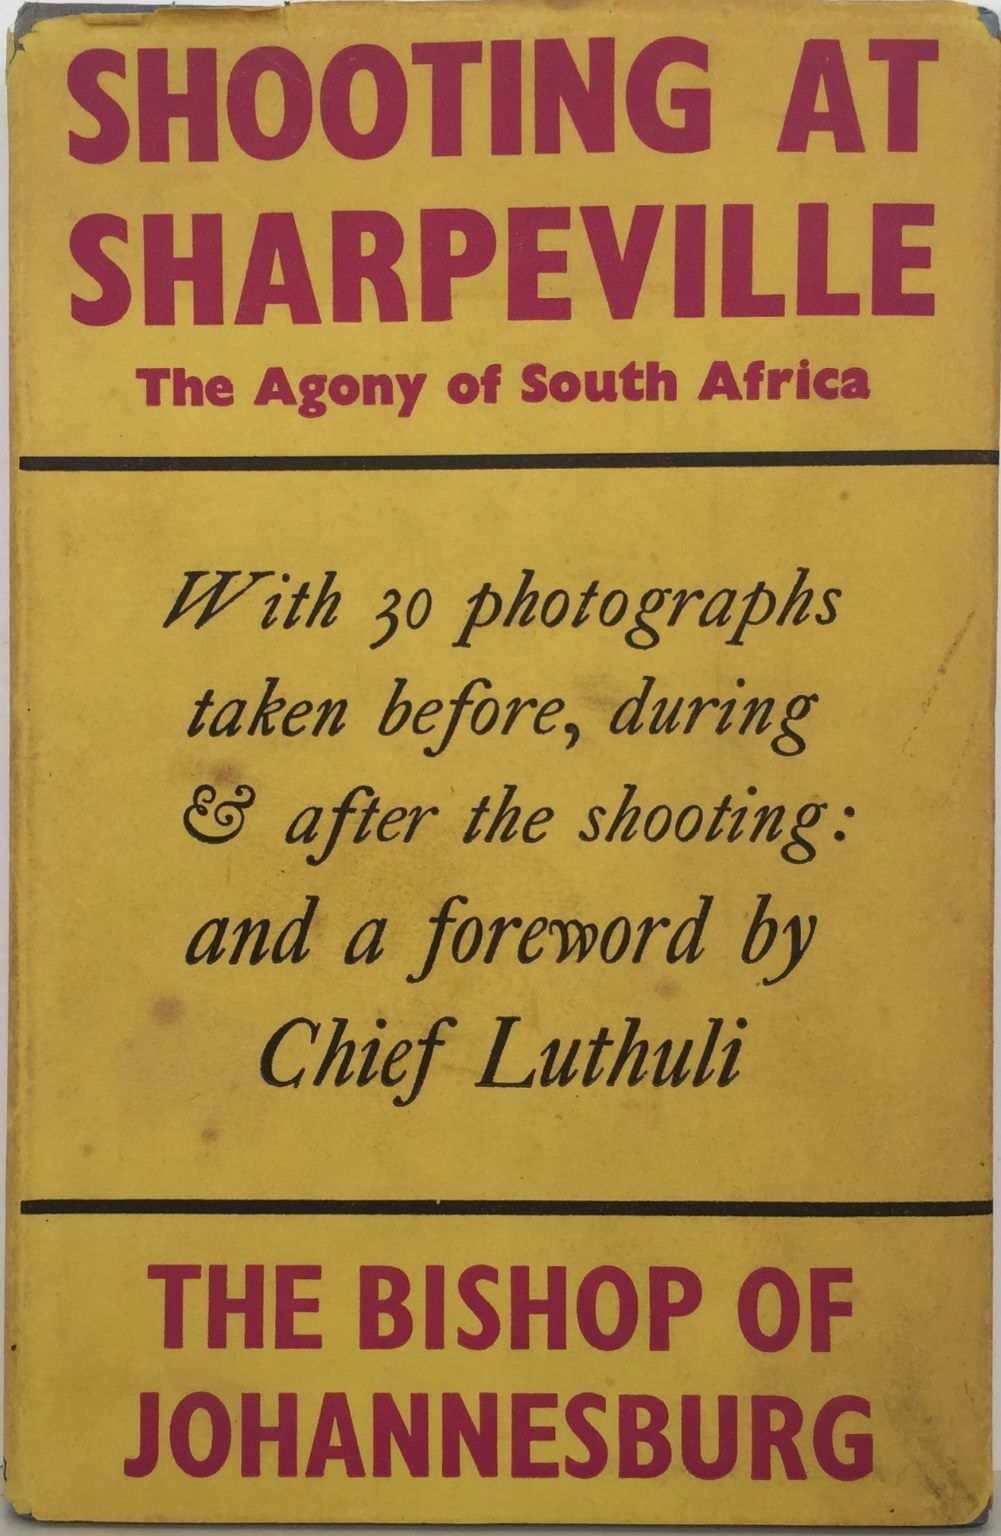 SHOOTING AT SHARPEVILLE: The Agony of South Africa